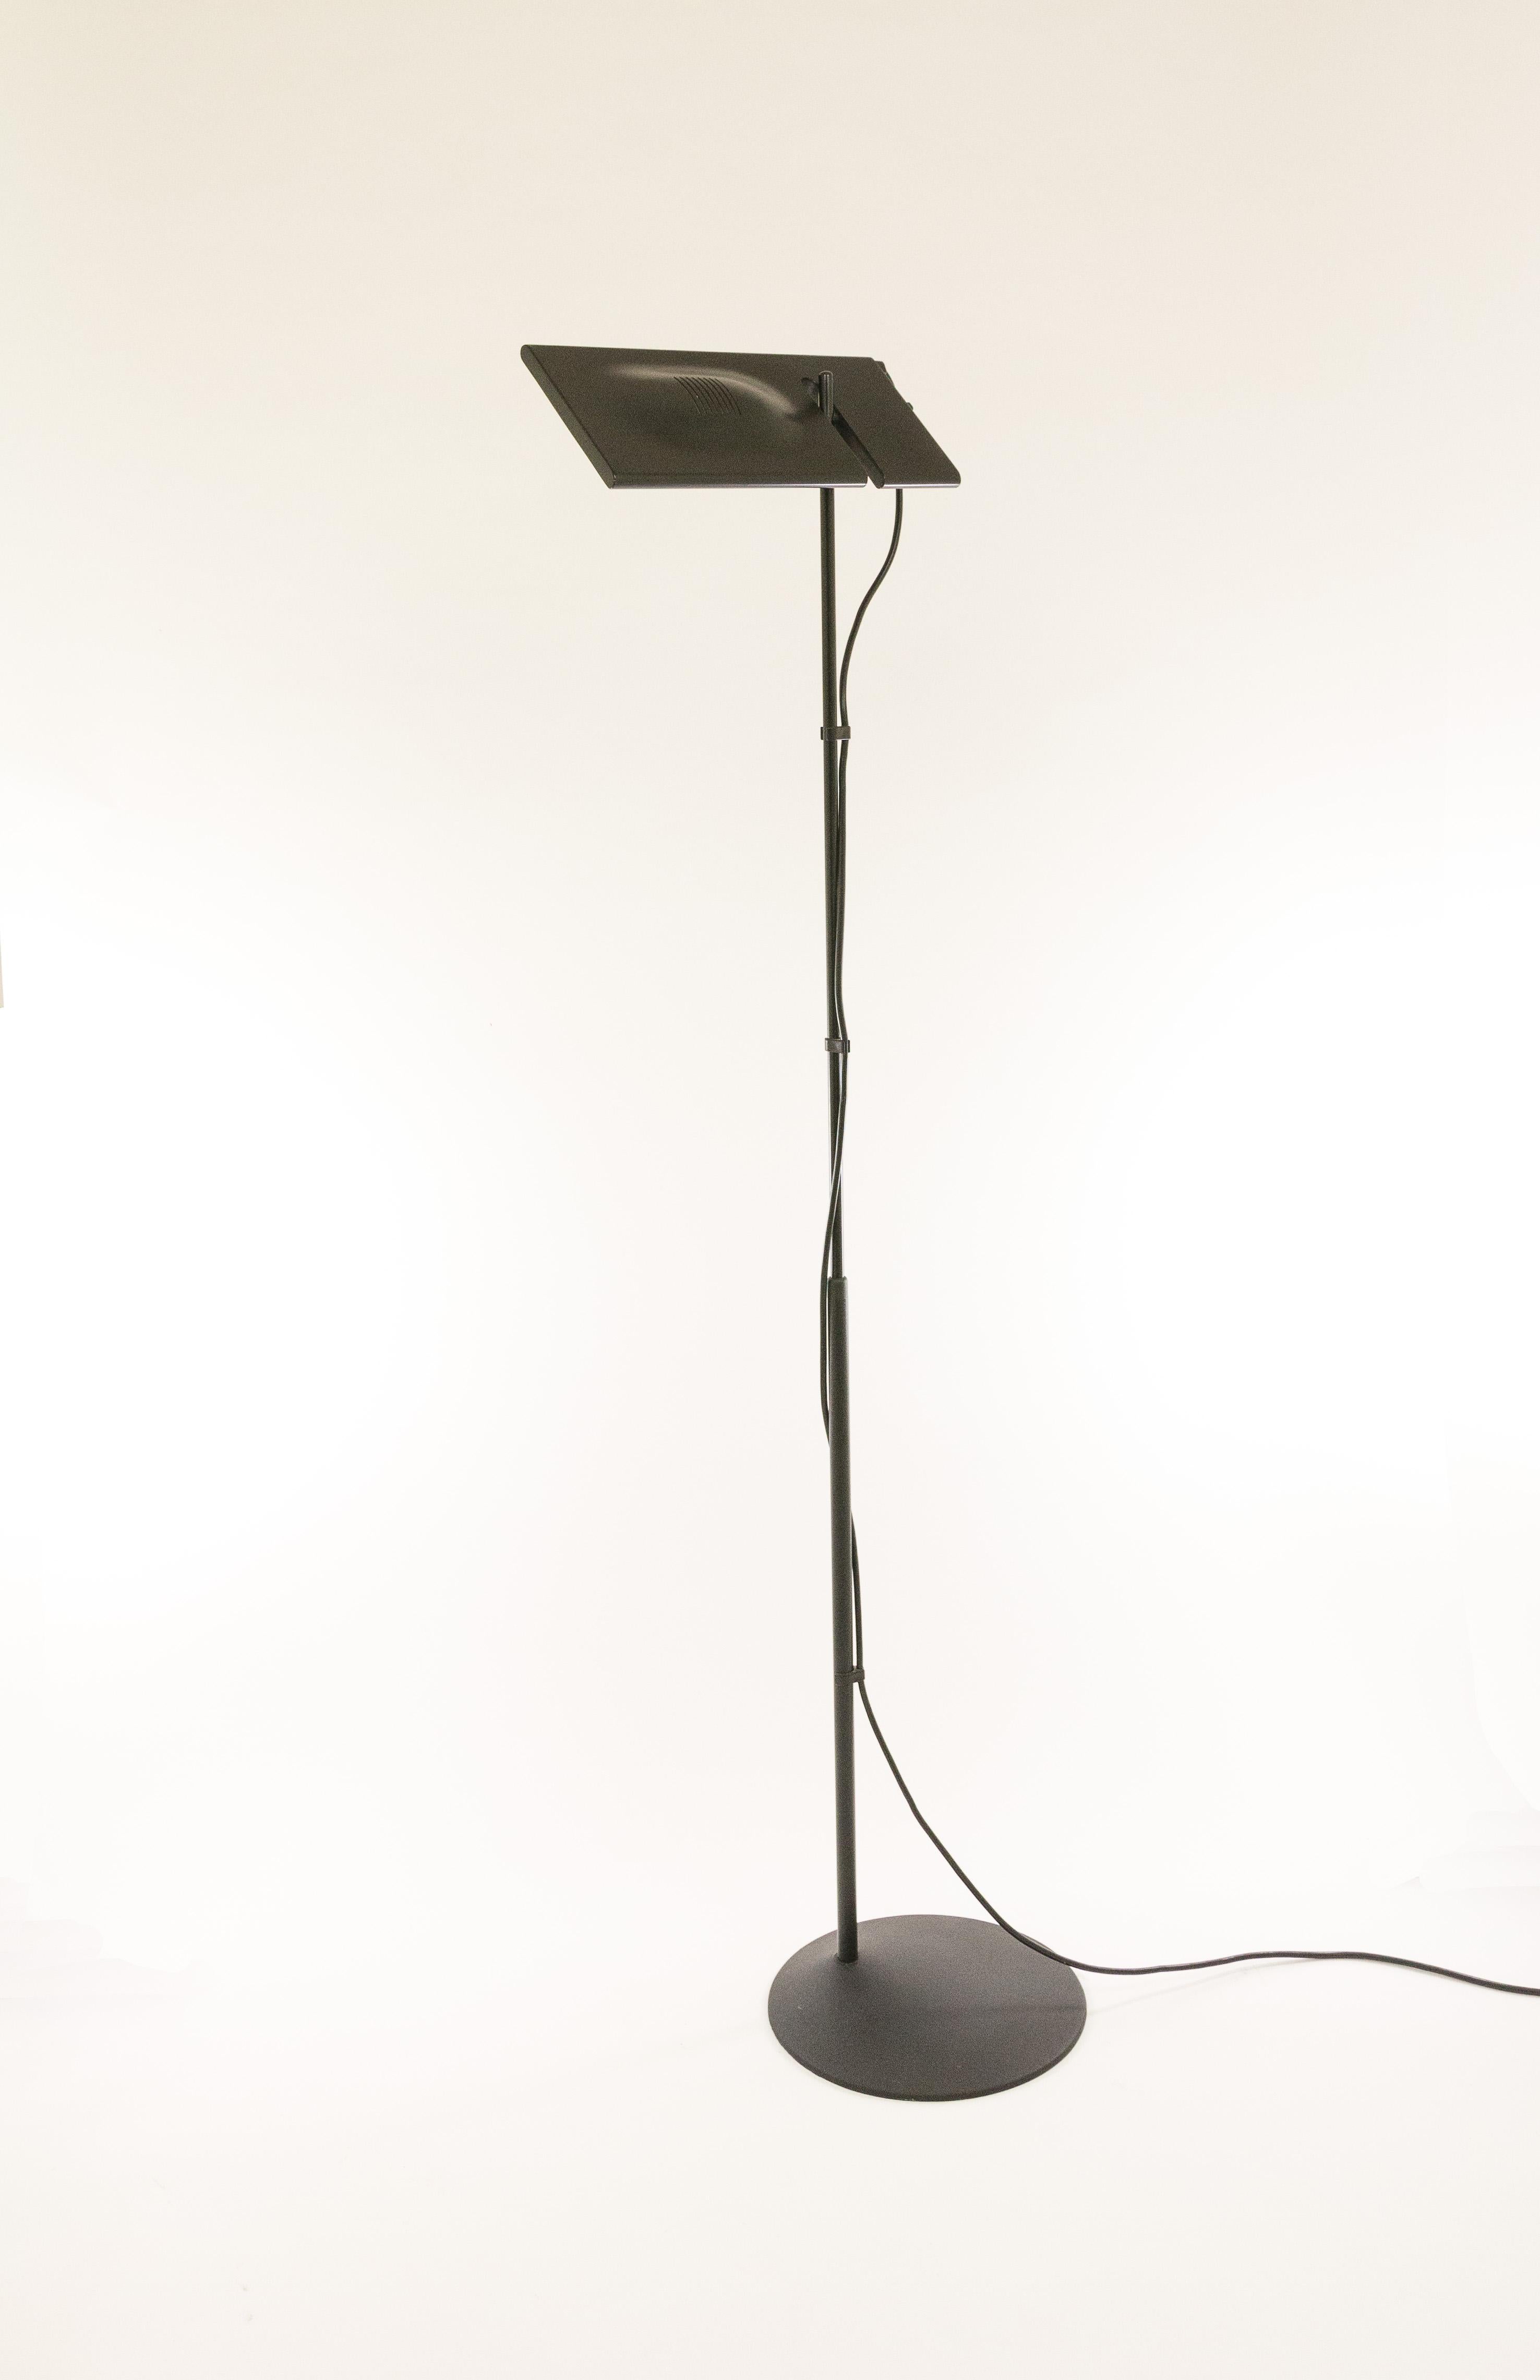 Lacquered Set of Duna Floor Lamps by Mario Barbaglia & MarCo Colombo for Paf Studio, 1980s For Sale